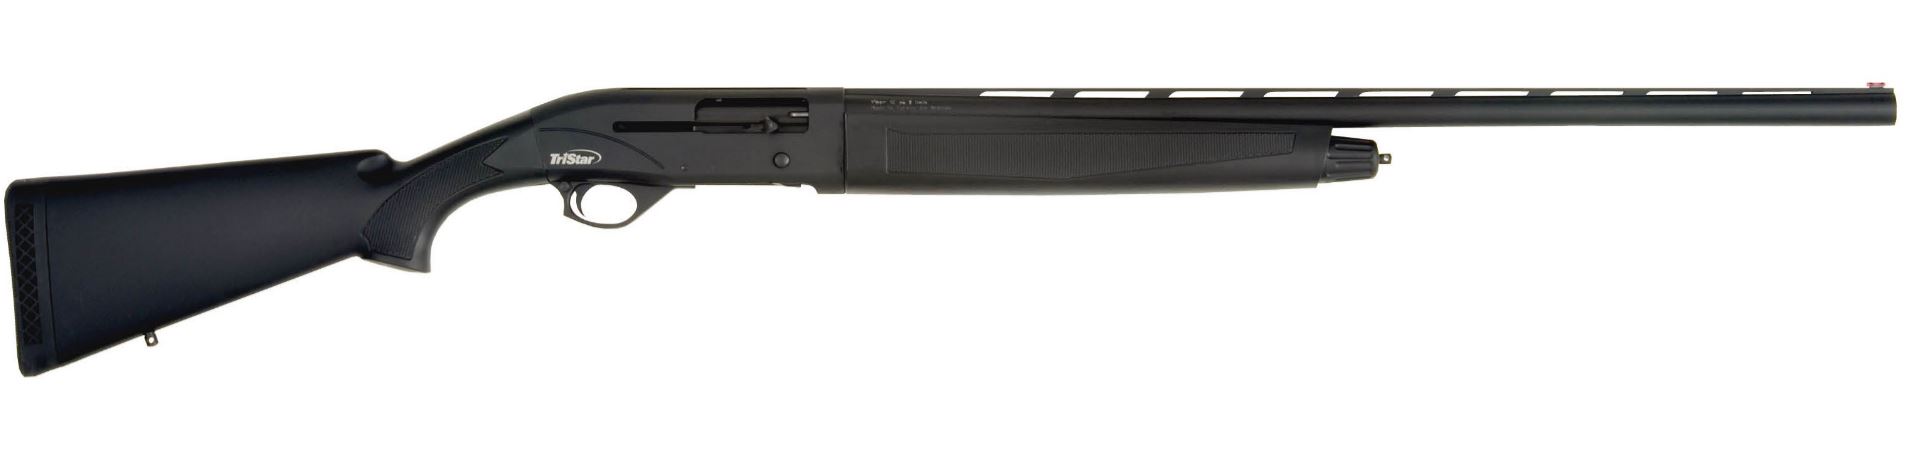 TriStar Sporting Arms Viper G2